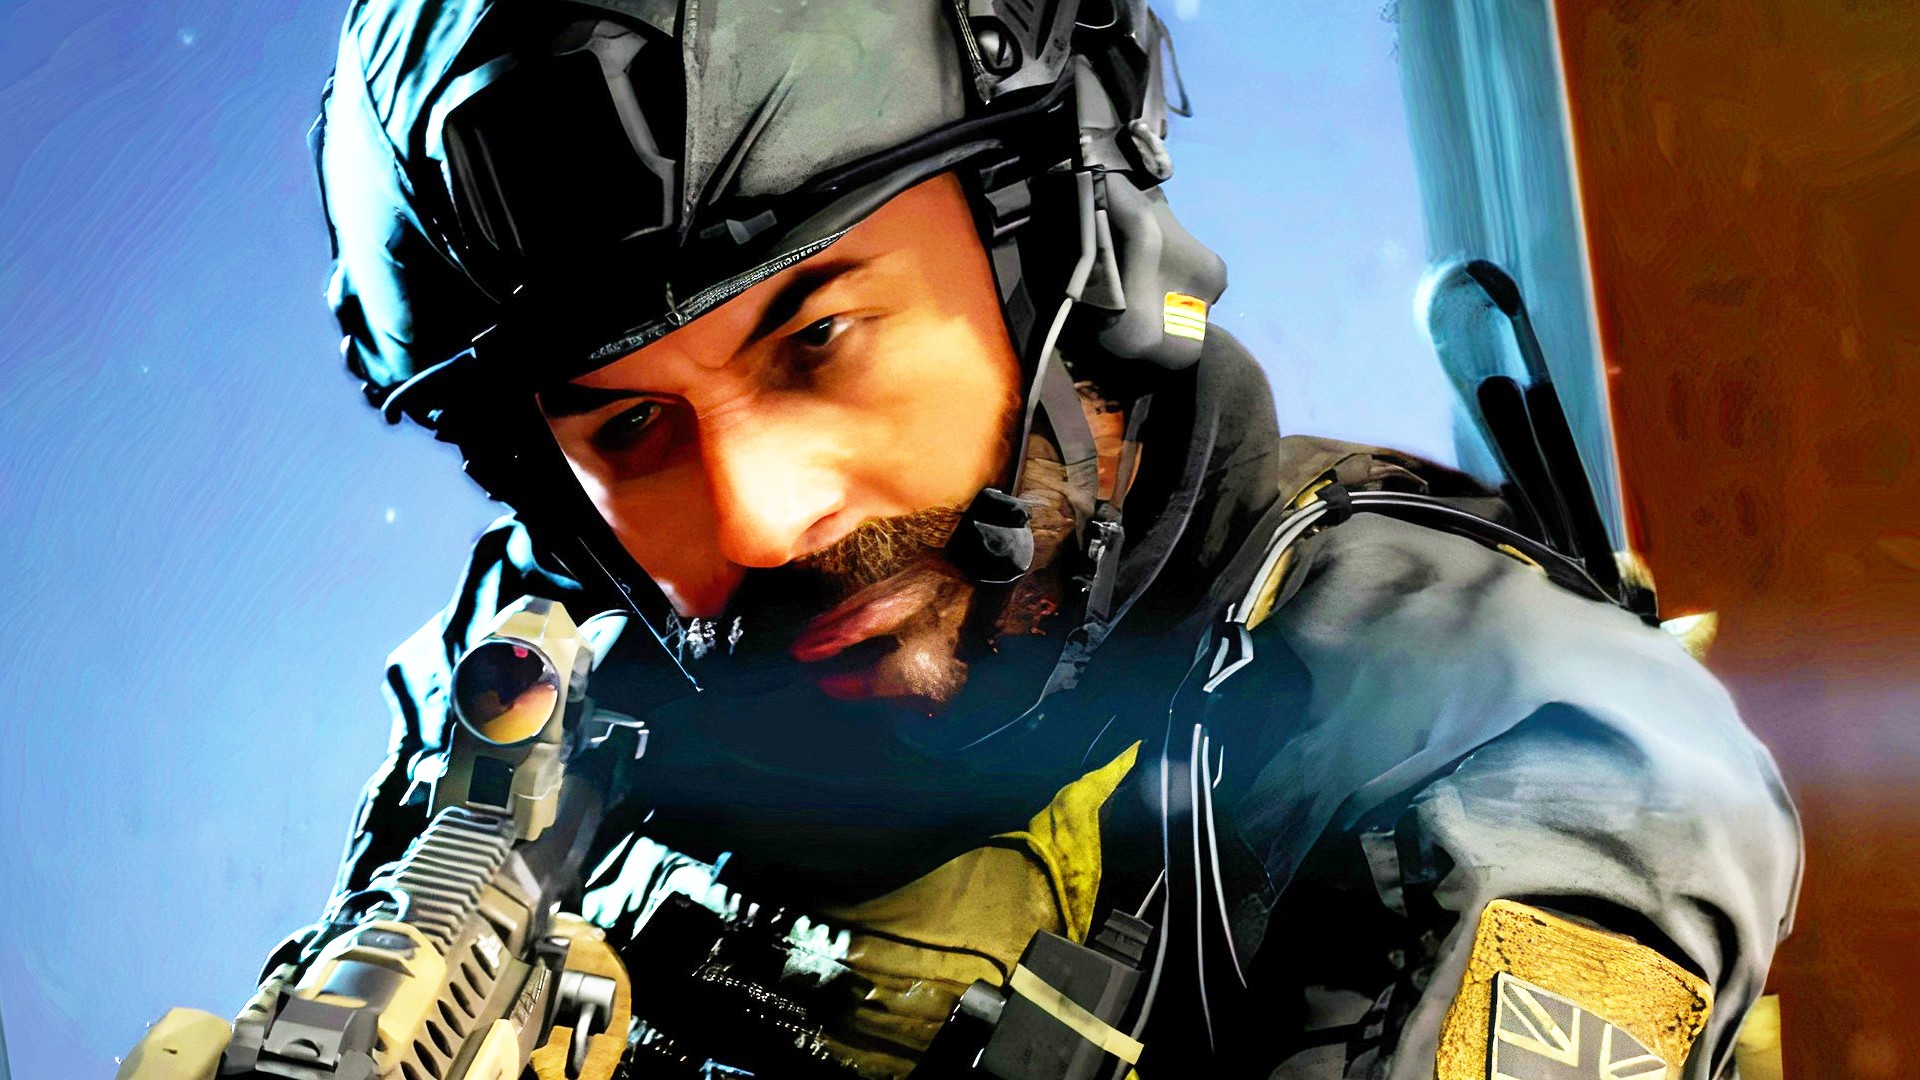 How much will new Modern Warfare 3 cost? No MW3 cost rumors